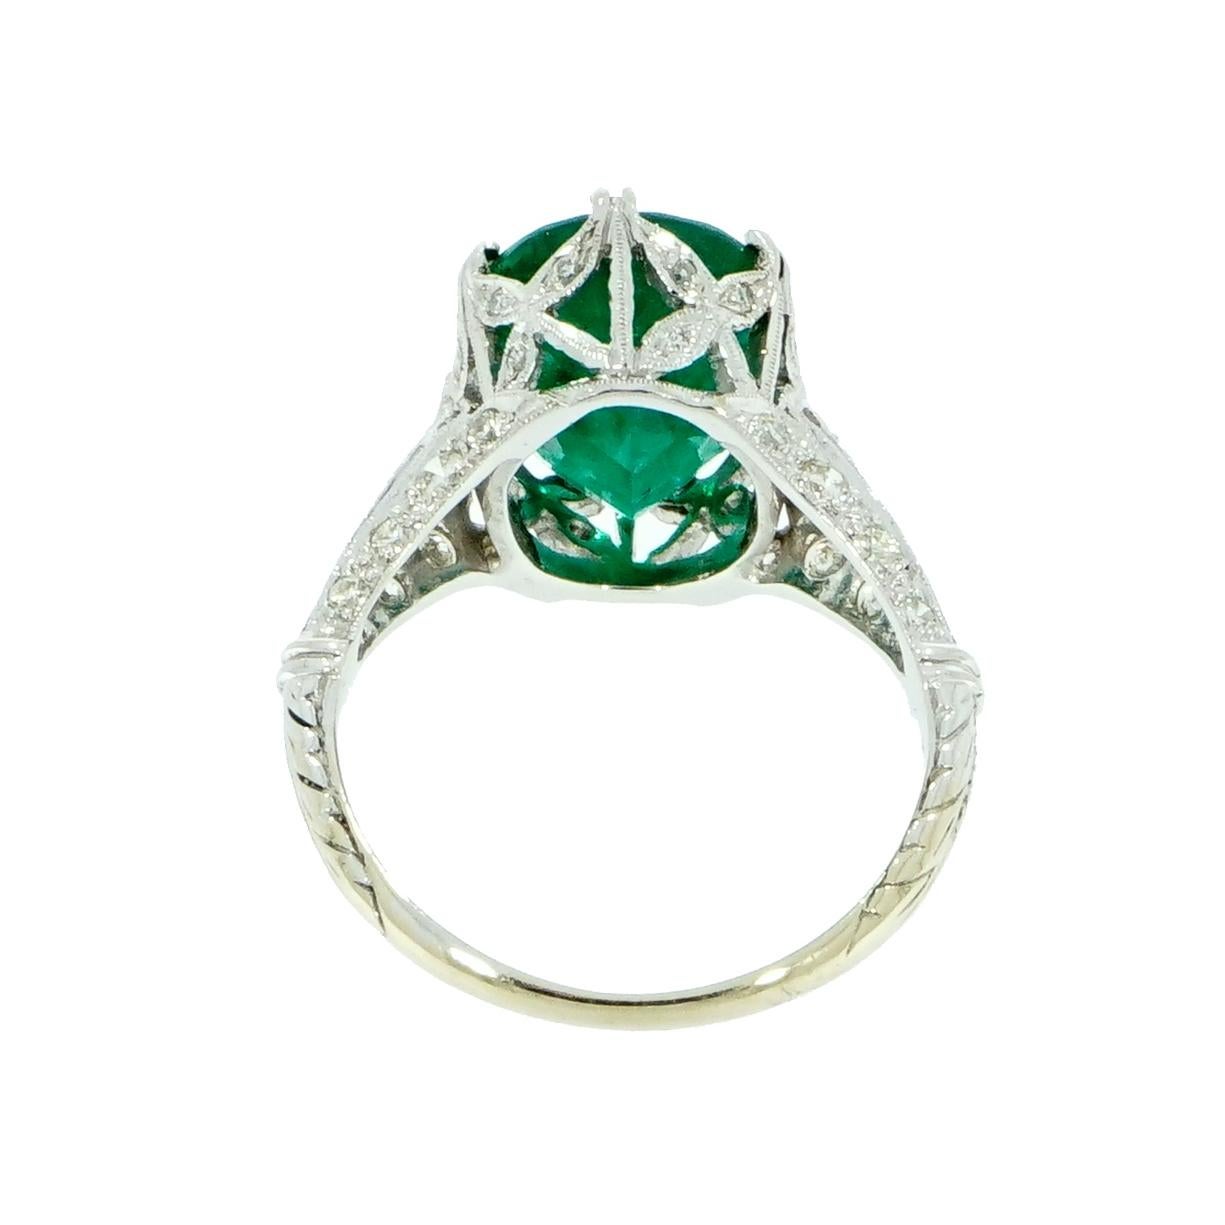 A Timeless Emerald ring… A fine example of Art Deco jewelry in its entire splendor! 
Ideal to be worn alone or as a lovely alternative Vintage Engagement Ring. 
A Family Heirloom Quality Keepsake, to have and to hold Forever! 
The oval Emerald is